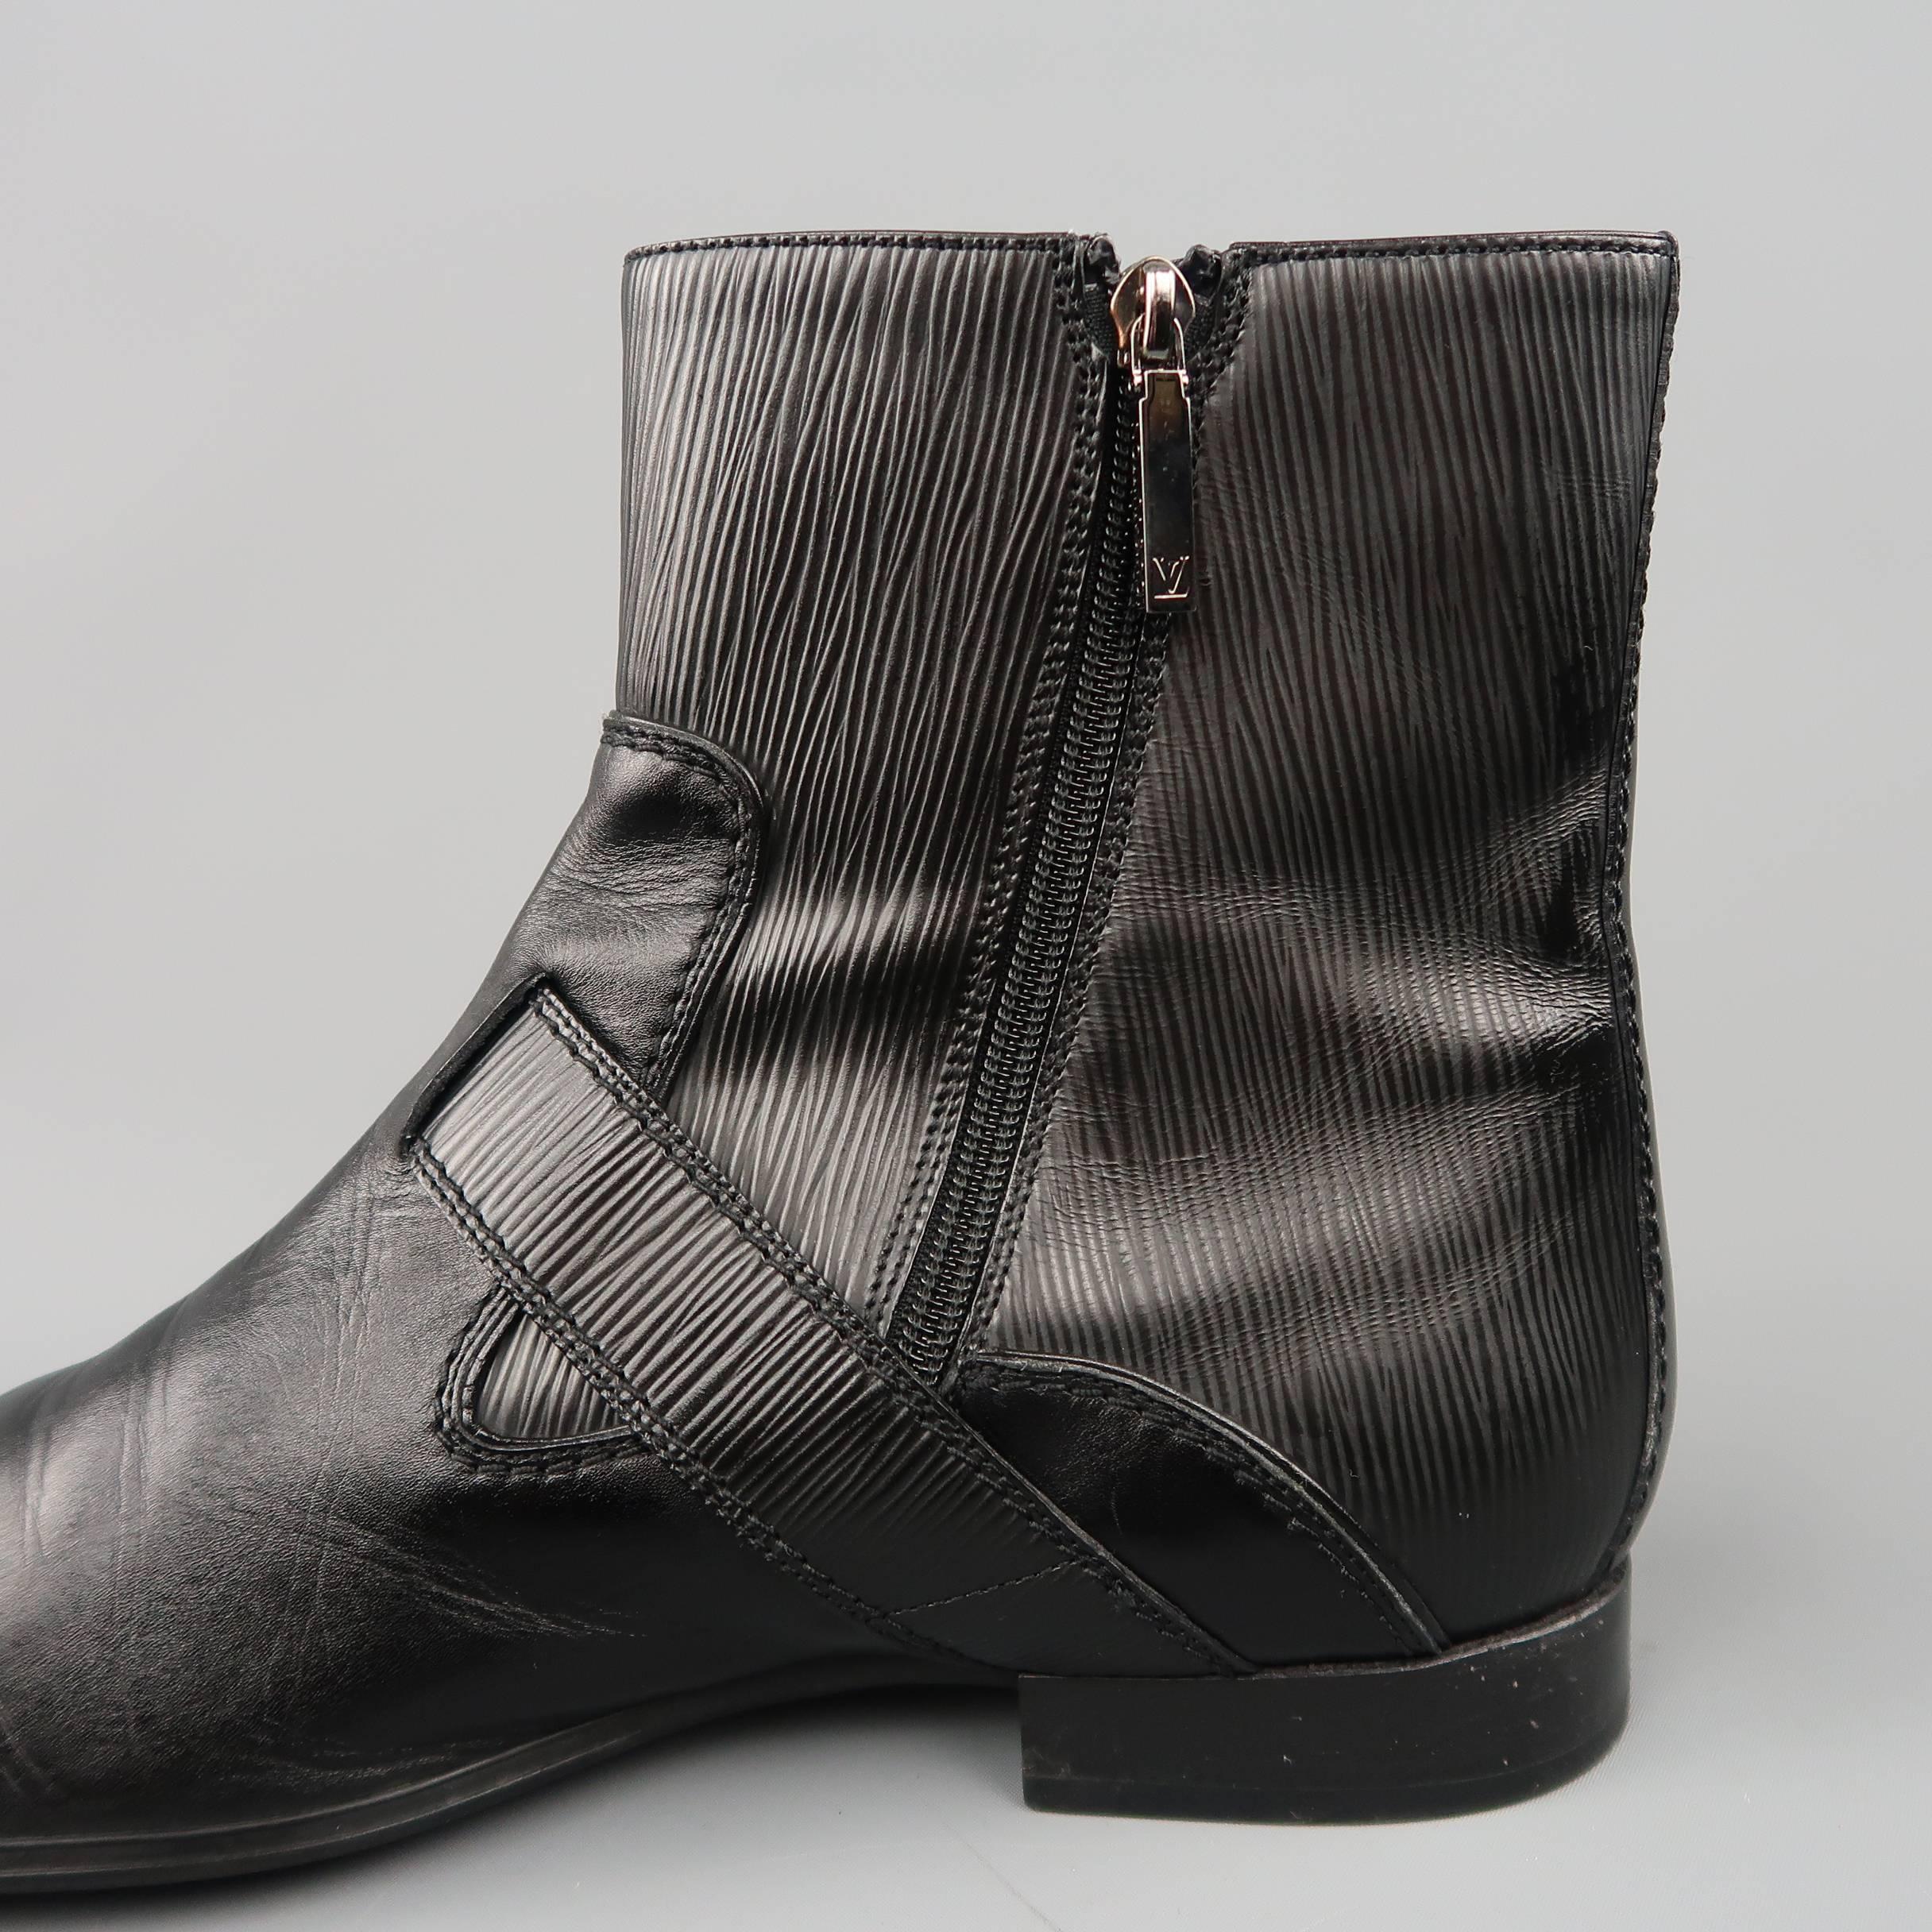 mens boots with buckle strap